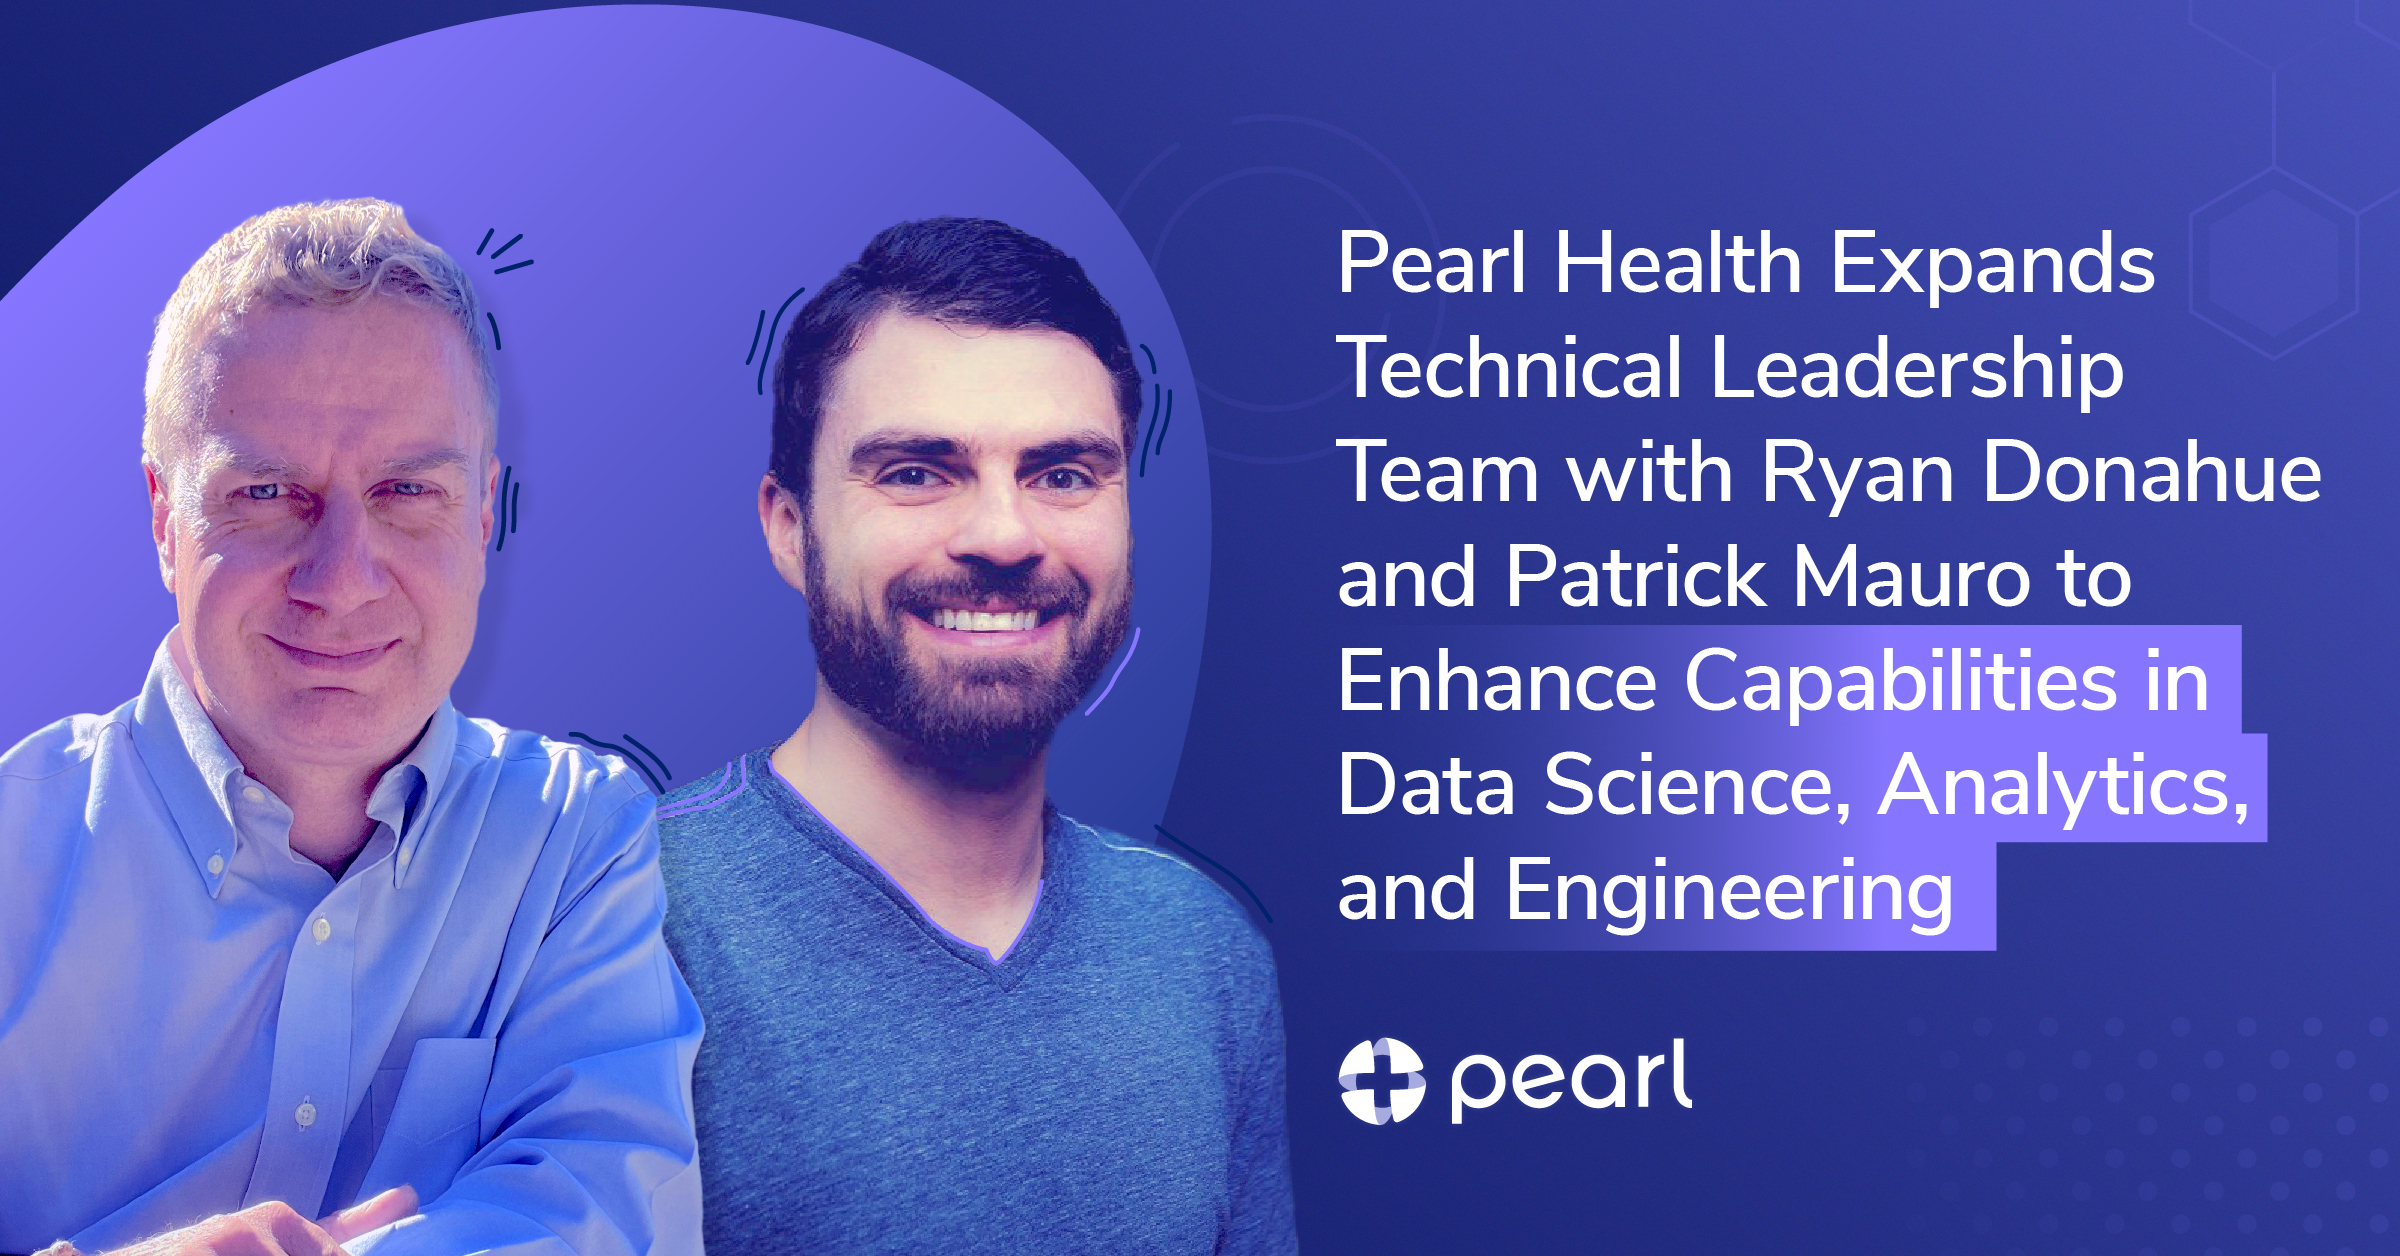 Pearl Health Expands Technical LeadershipTeam with Ryan Donahue and Patrick Mauro to Enhance Capabilities in Data Science, Analytics, and Engineering